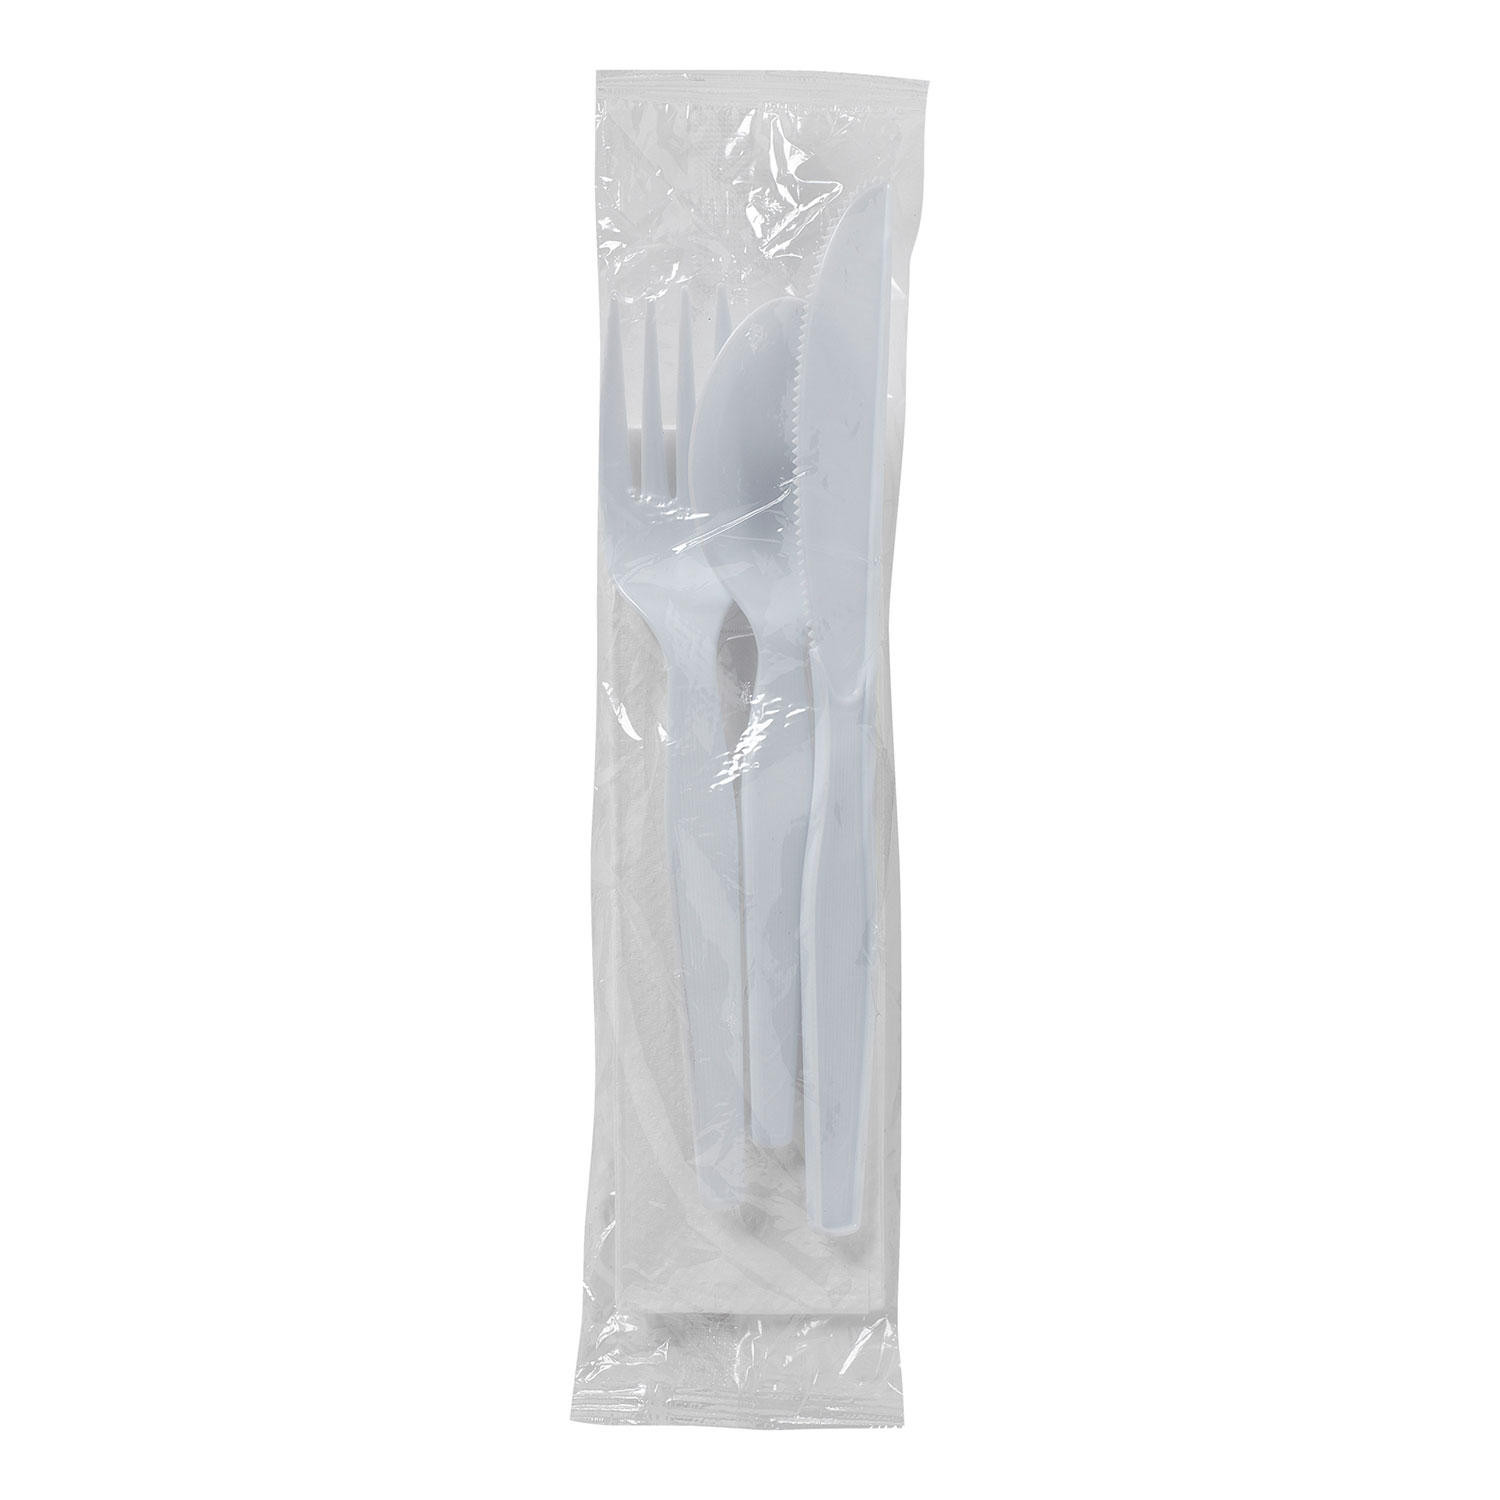 Dixie Wrapped Cutlery Kit, Medium Weight, Polystyrene, White (CM26NC7) 250 ct.